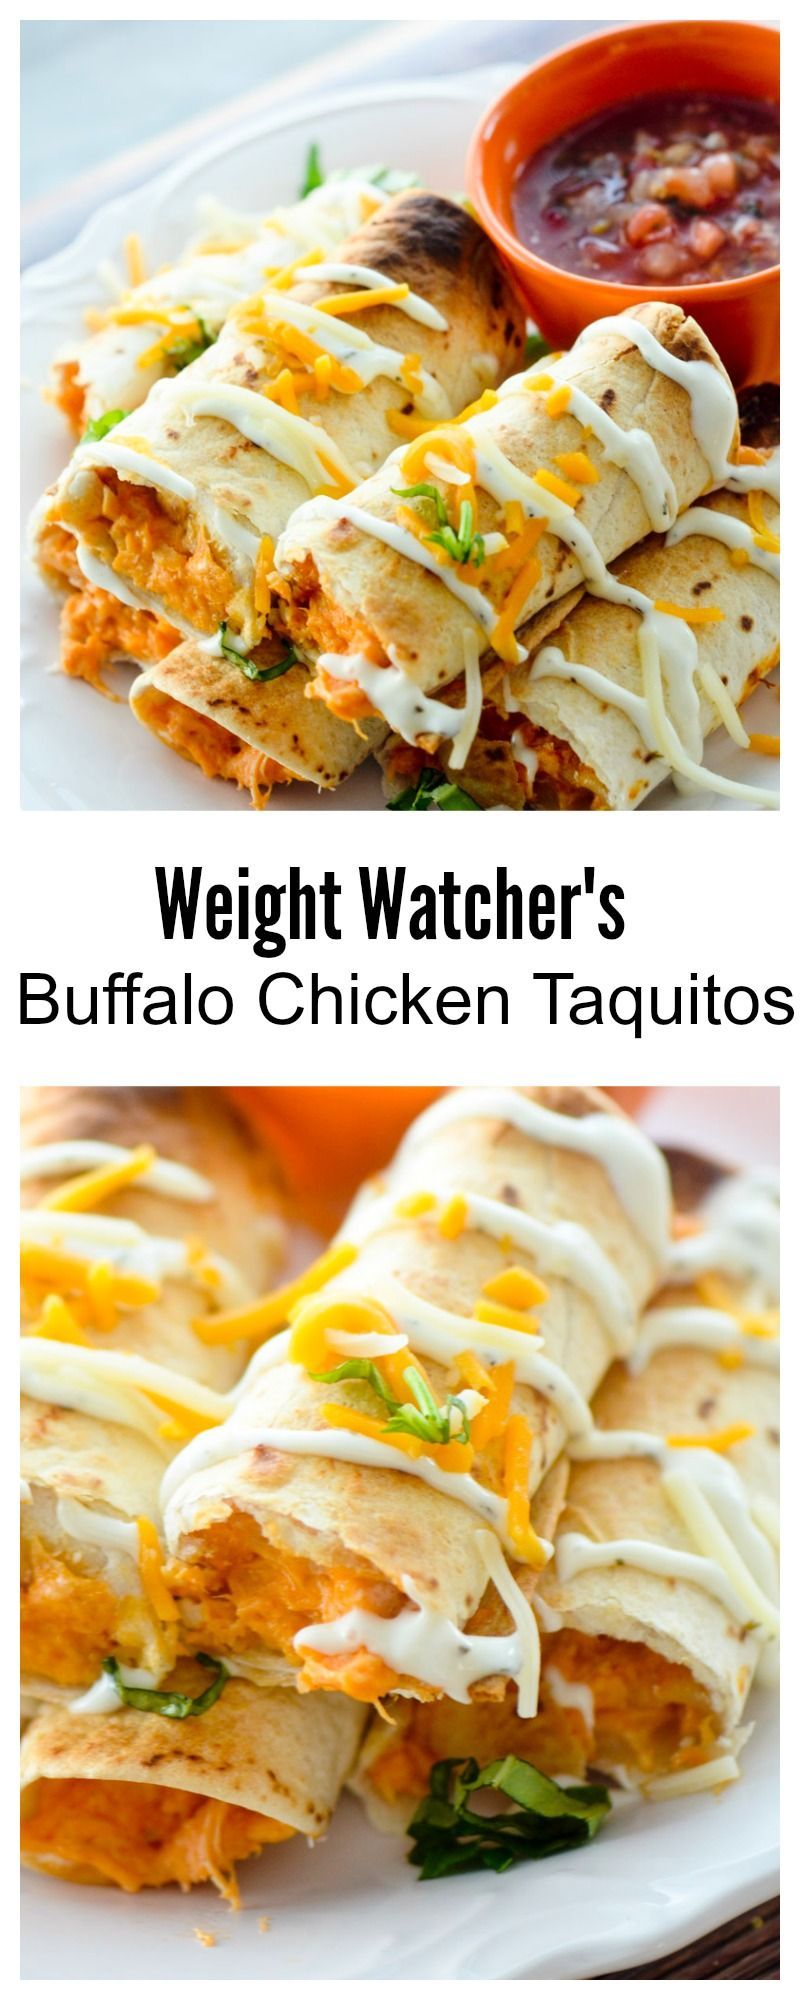 Baked Buffalo Chicken Taquitos for Weight Watcher’s – 3 points – Recipe Diaries